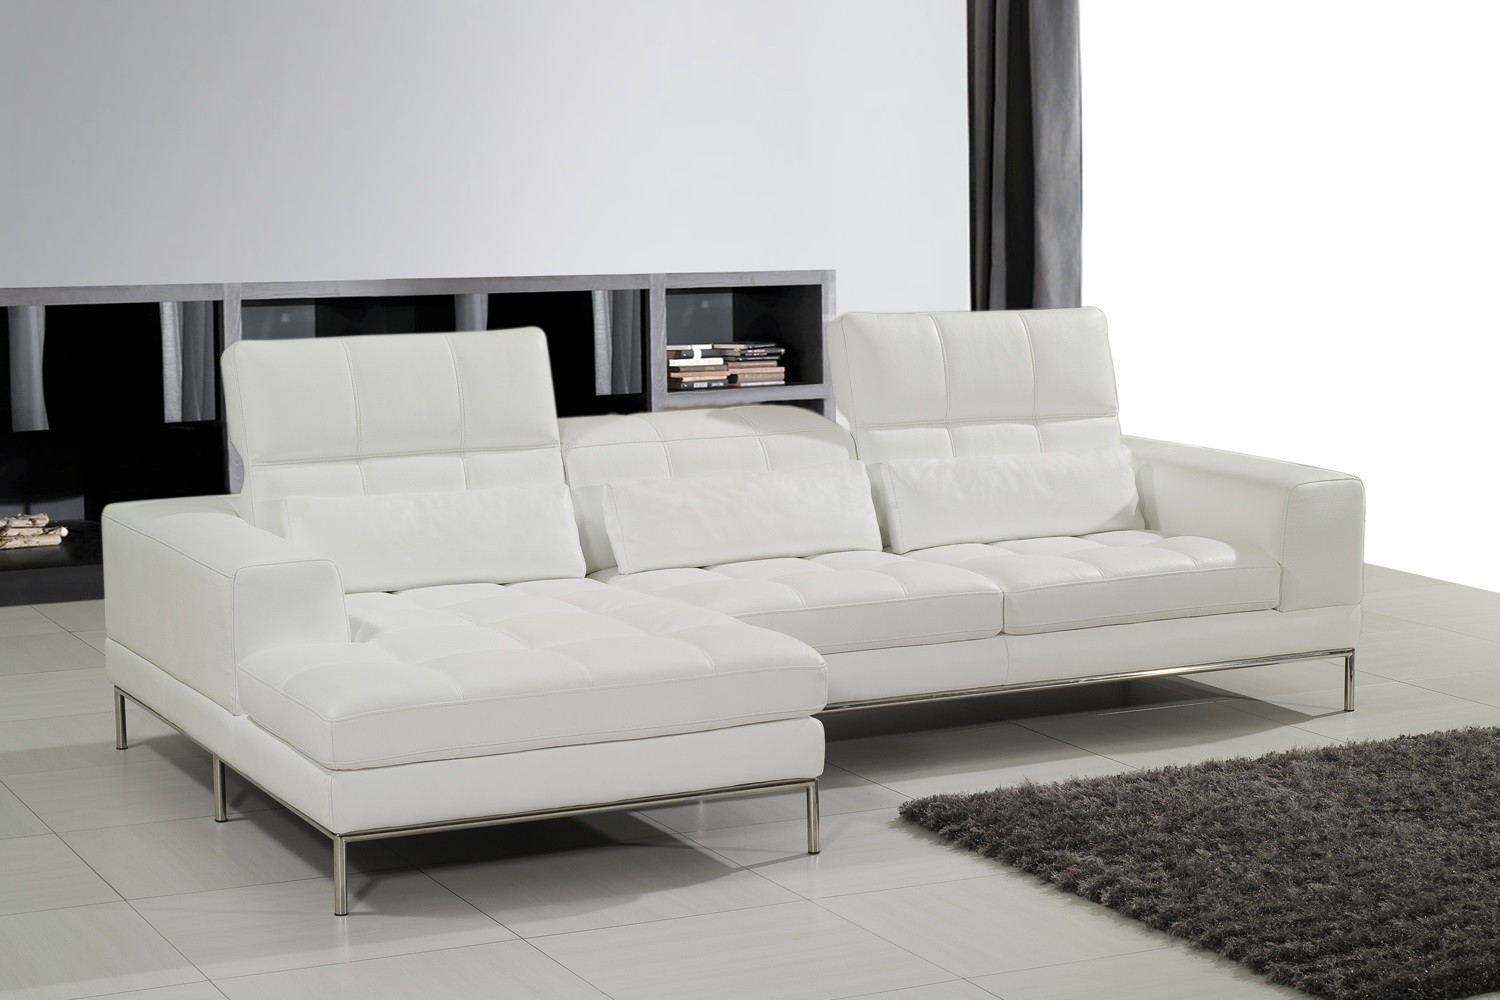 Tile Living Plus Contemporary Tile Living Room Floor Plus Black Shag Rug Idea And Trendy White Leather Sectional Sofa Design Furniture  Awesome Modern Luxury White Leather Sofa 